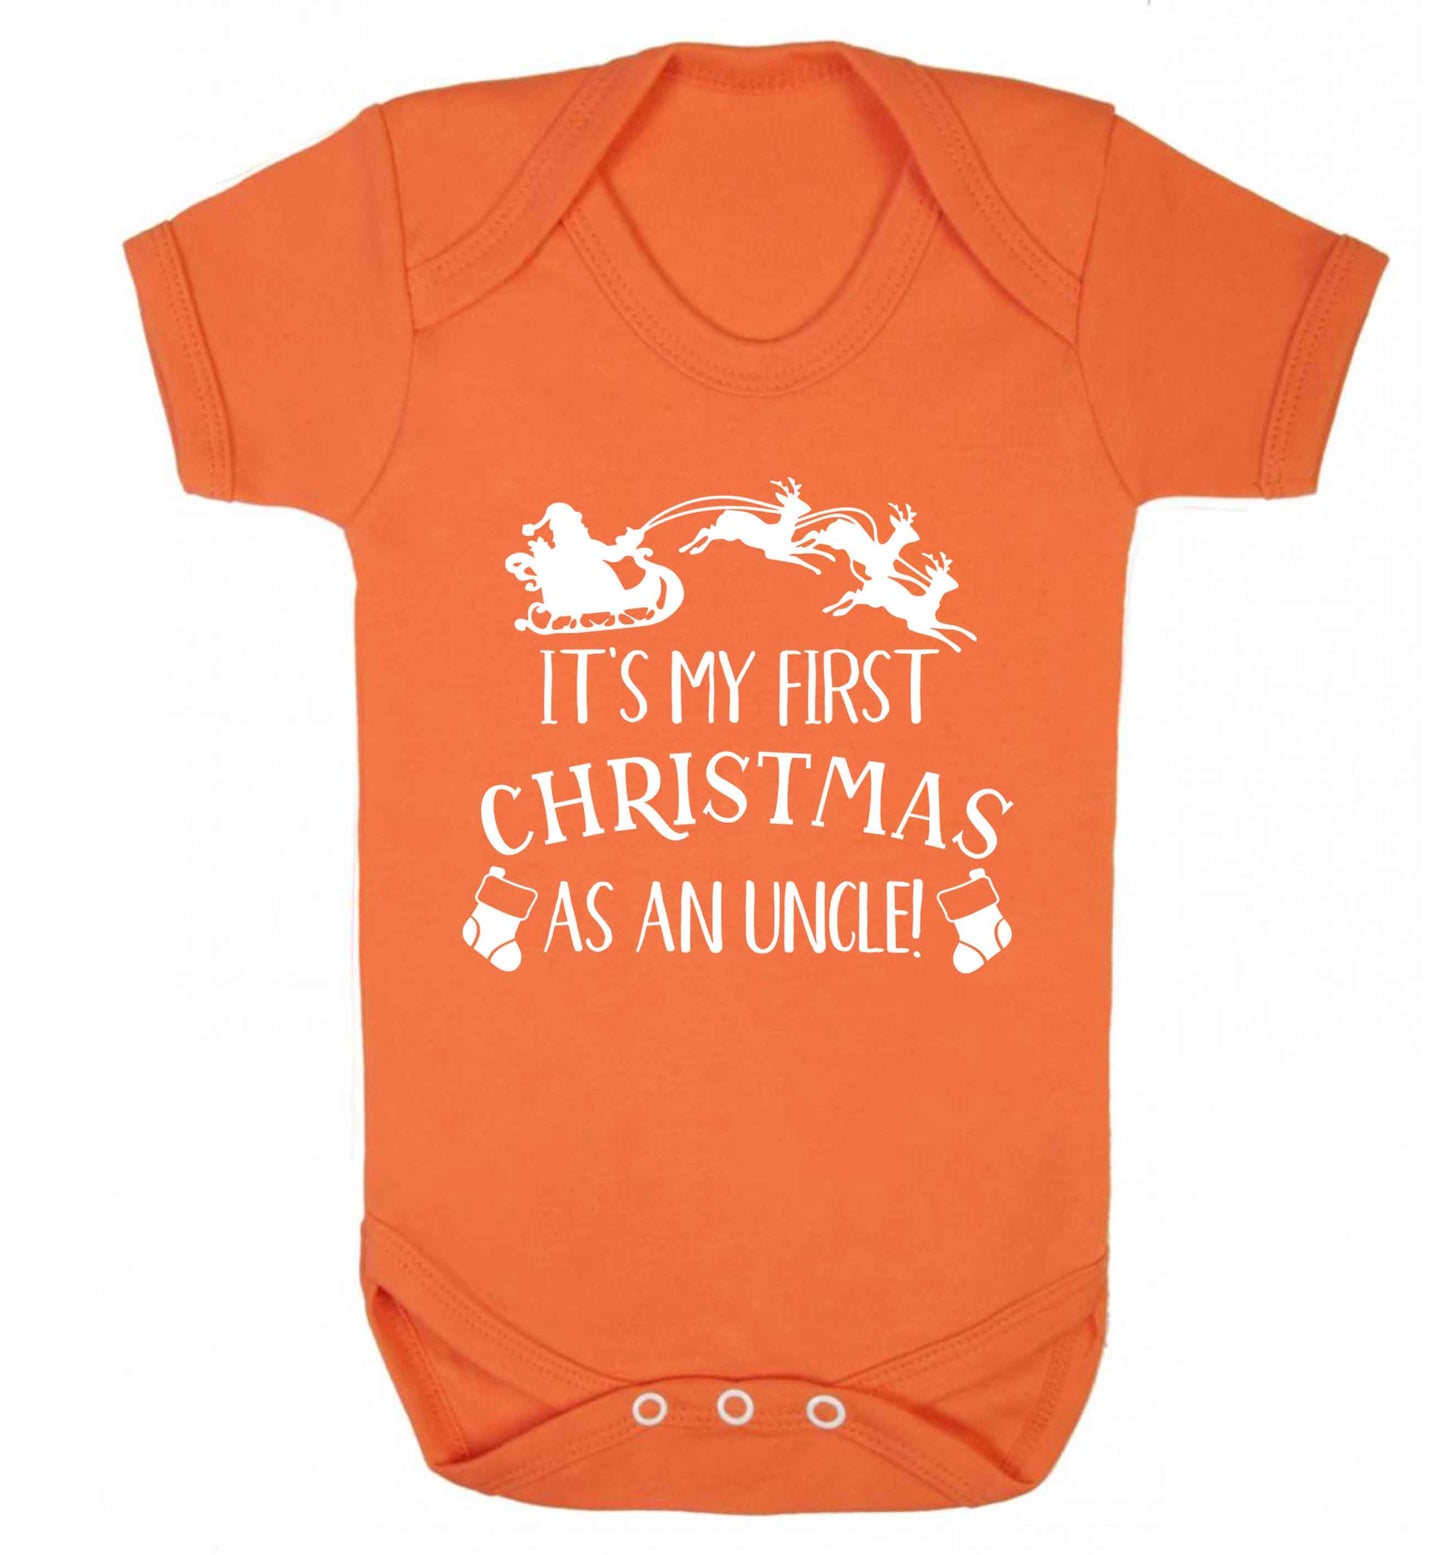 It's my first Christmas as an uncle! Baby Vest orange 18-24 months